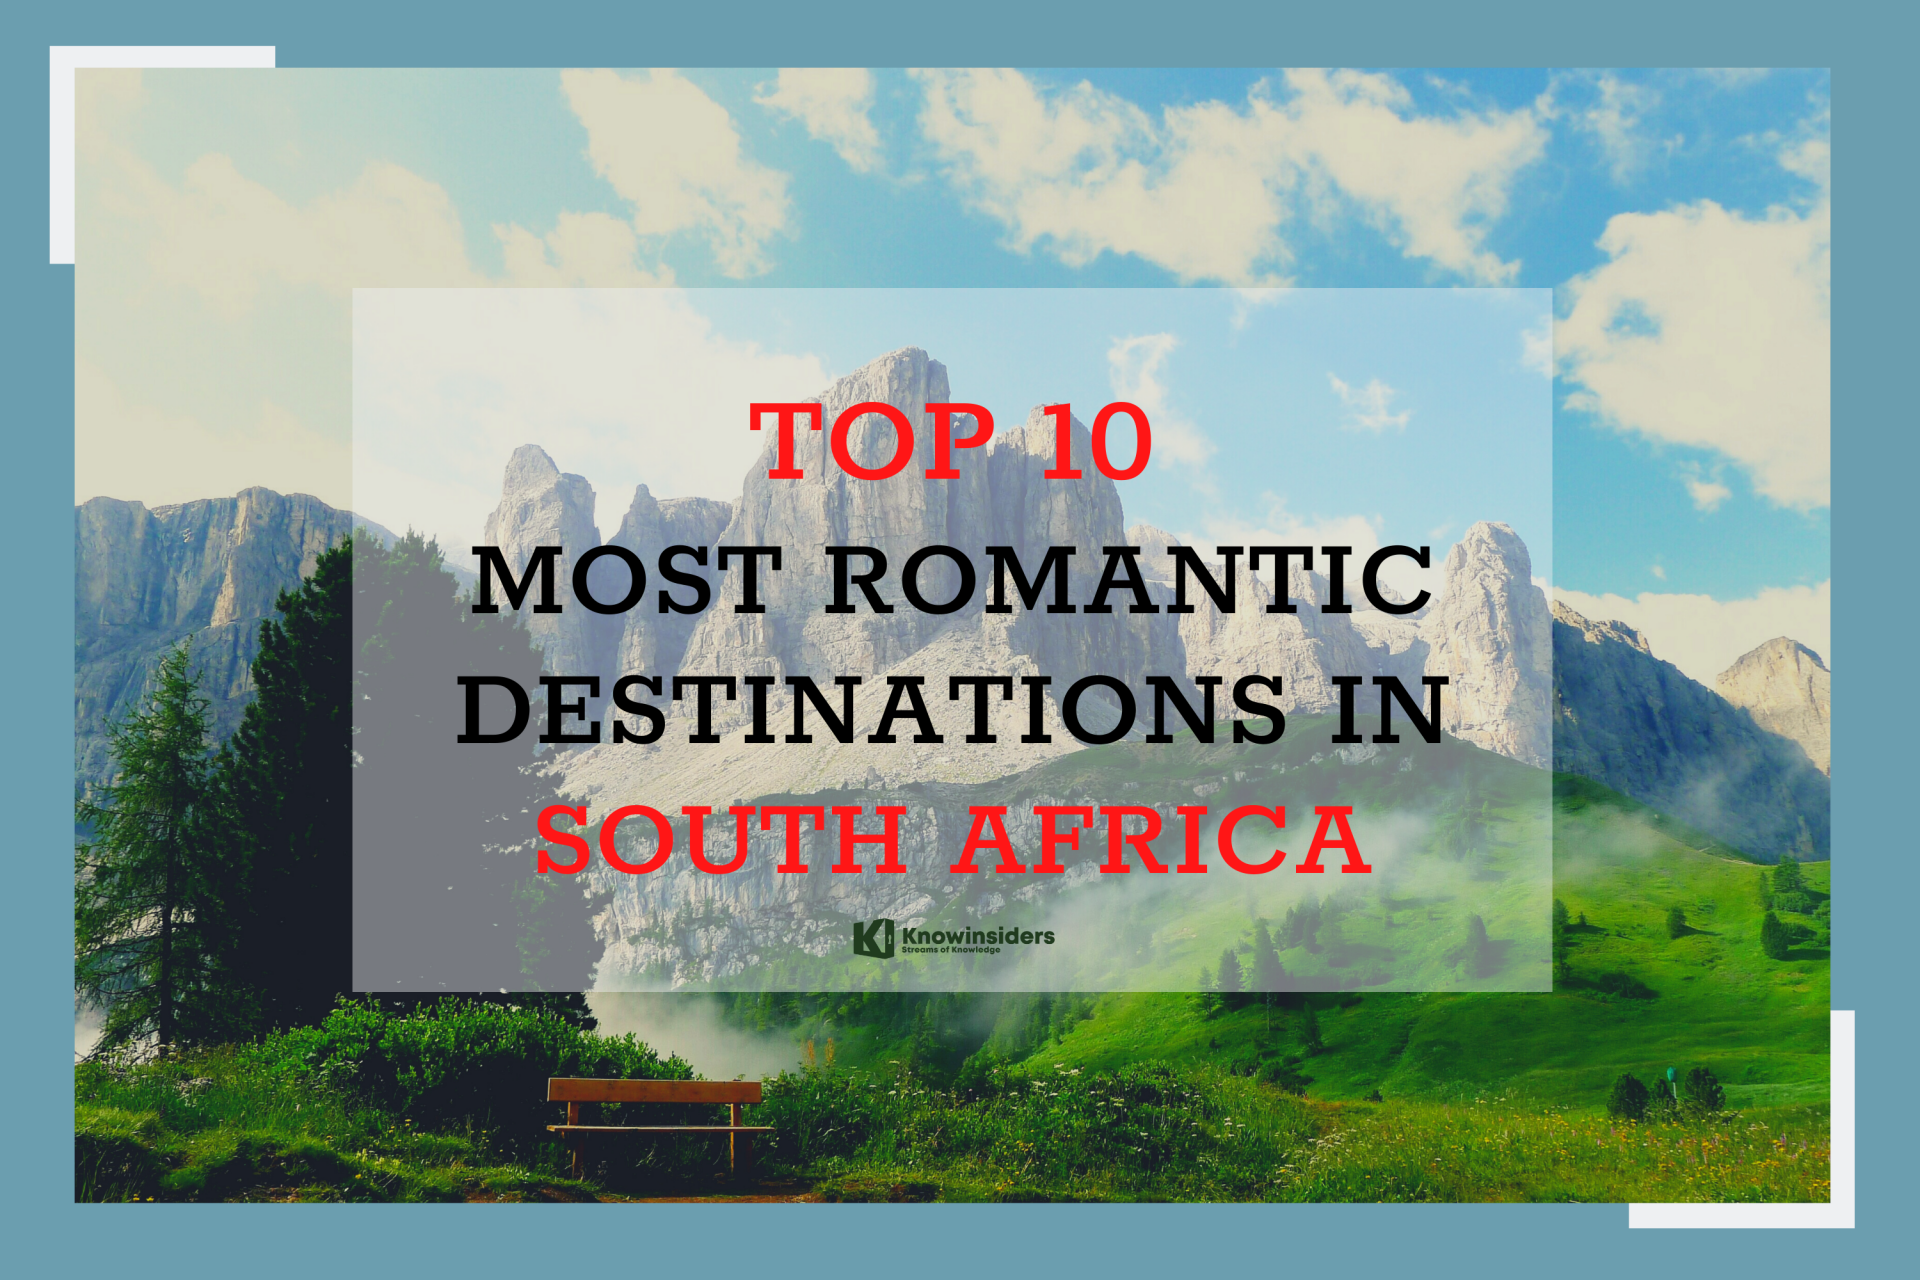 Top 10 Most Romantic Destinations in South Africa